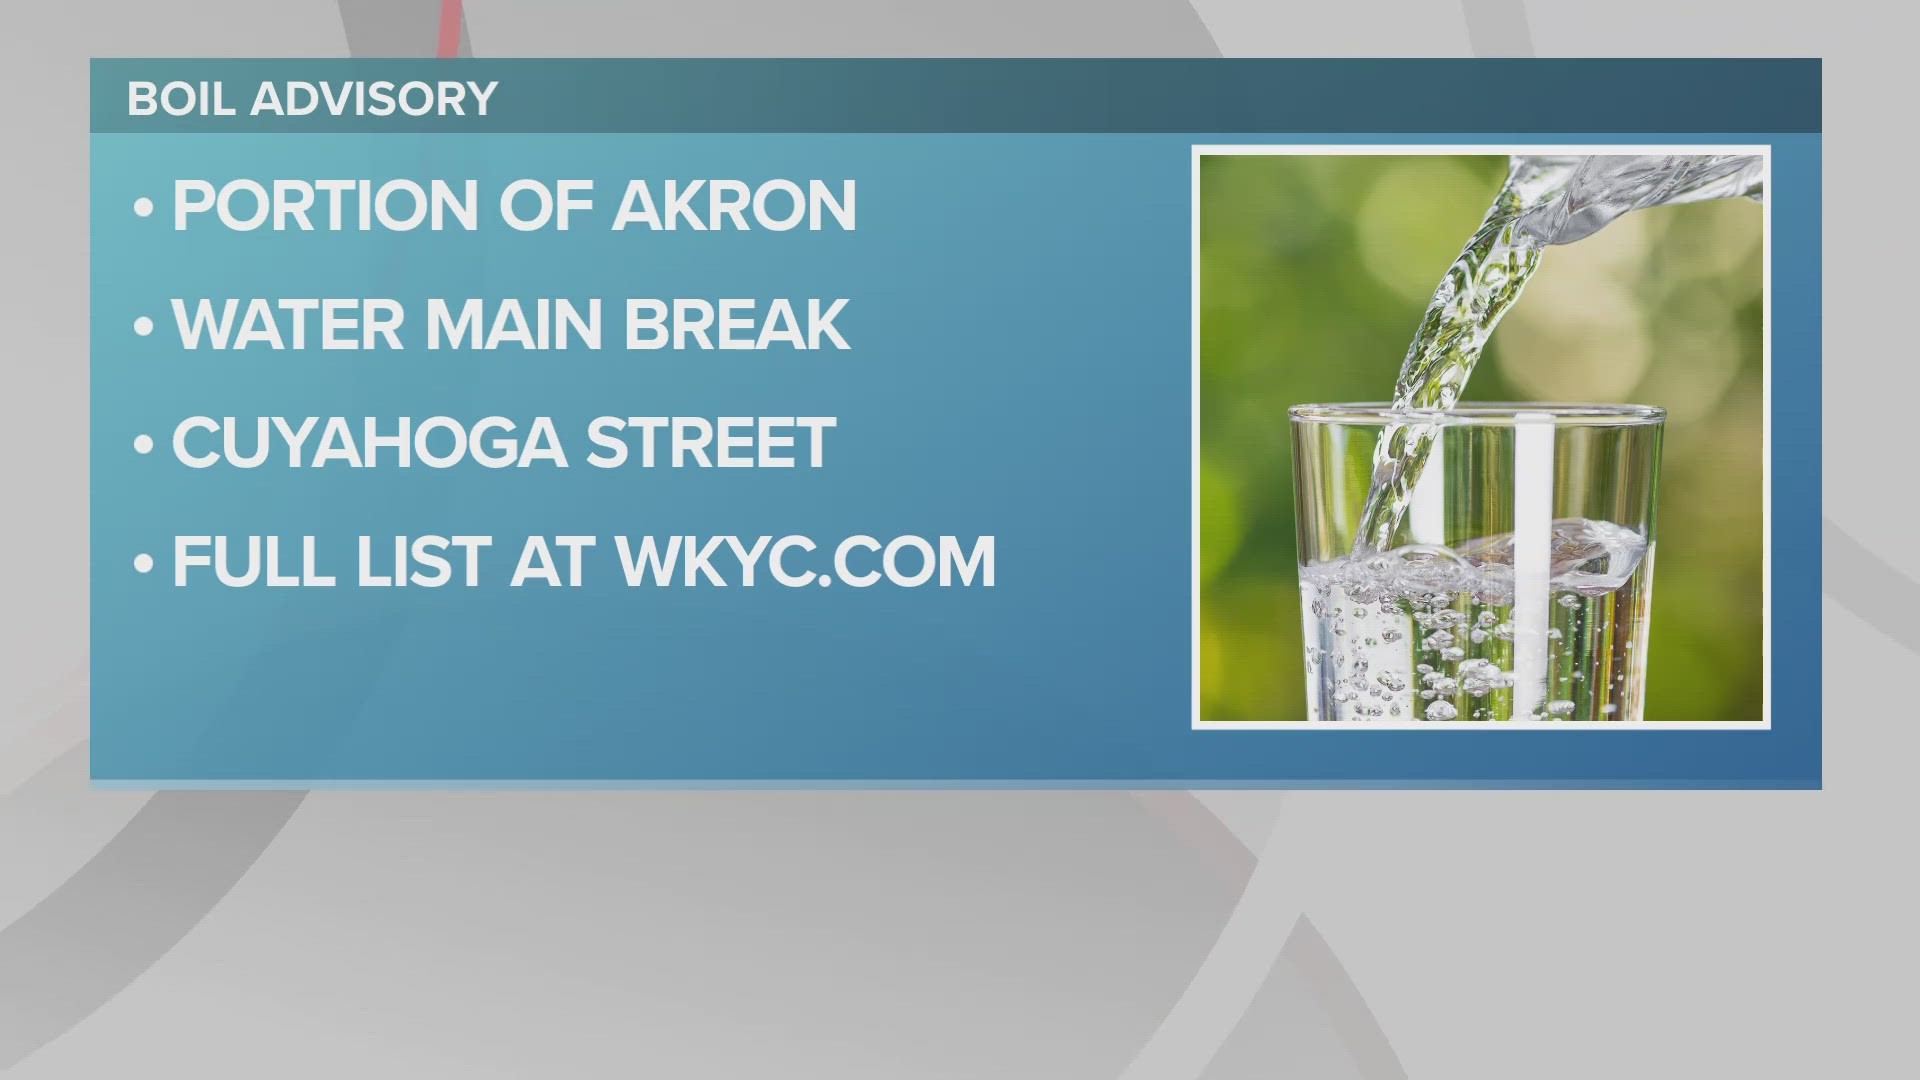 The advisory is impacting nearly 1000 addresses across Akron.